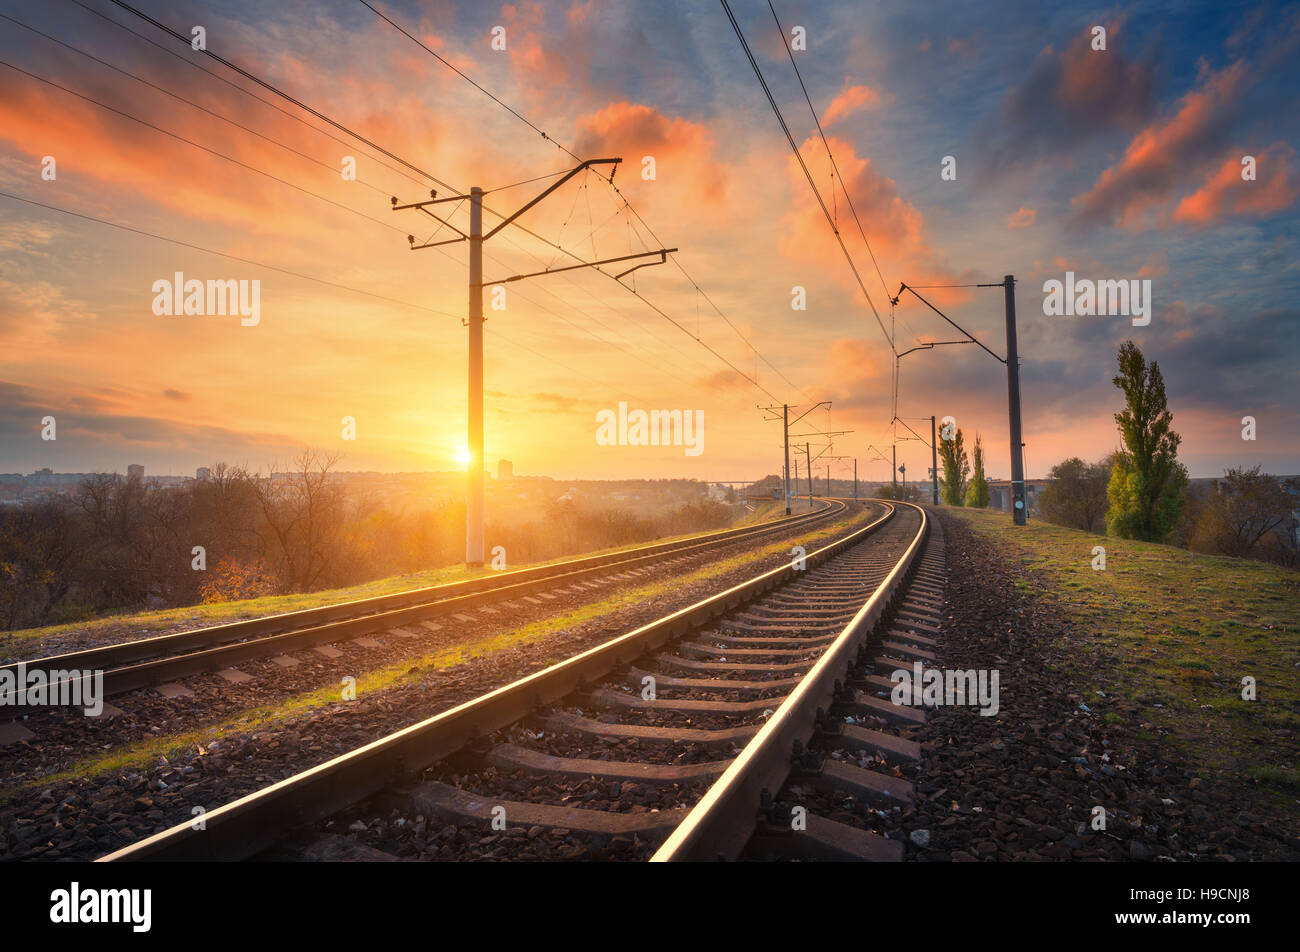 Railway station against beautiful sky at sunset. Industrial landscape with railroad, colorful blue sky with red clouds, trees Stock Photo